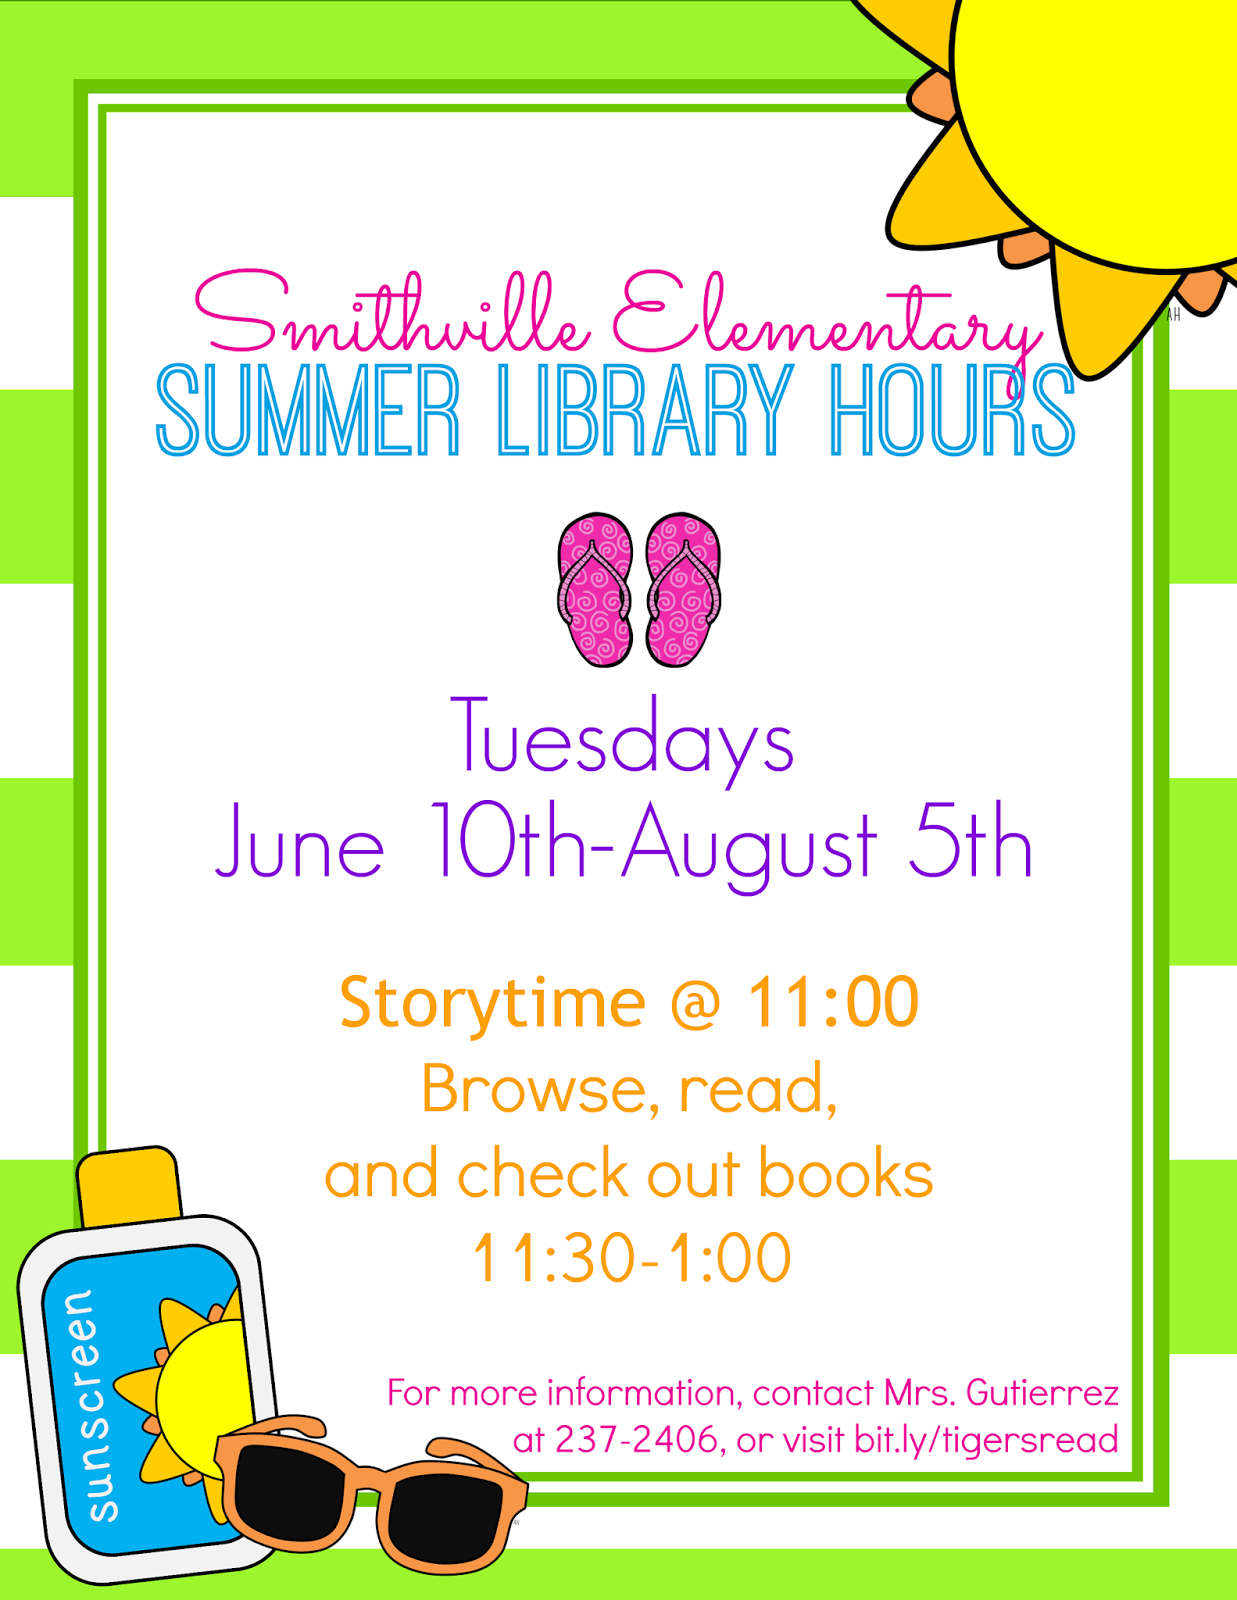 Smithville Elementary Library Announcing Summer Library Hours!